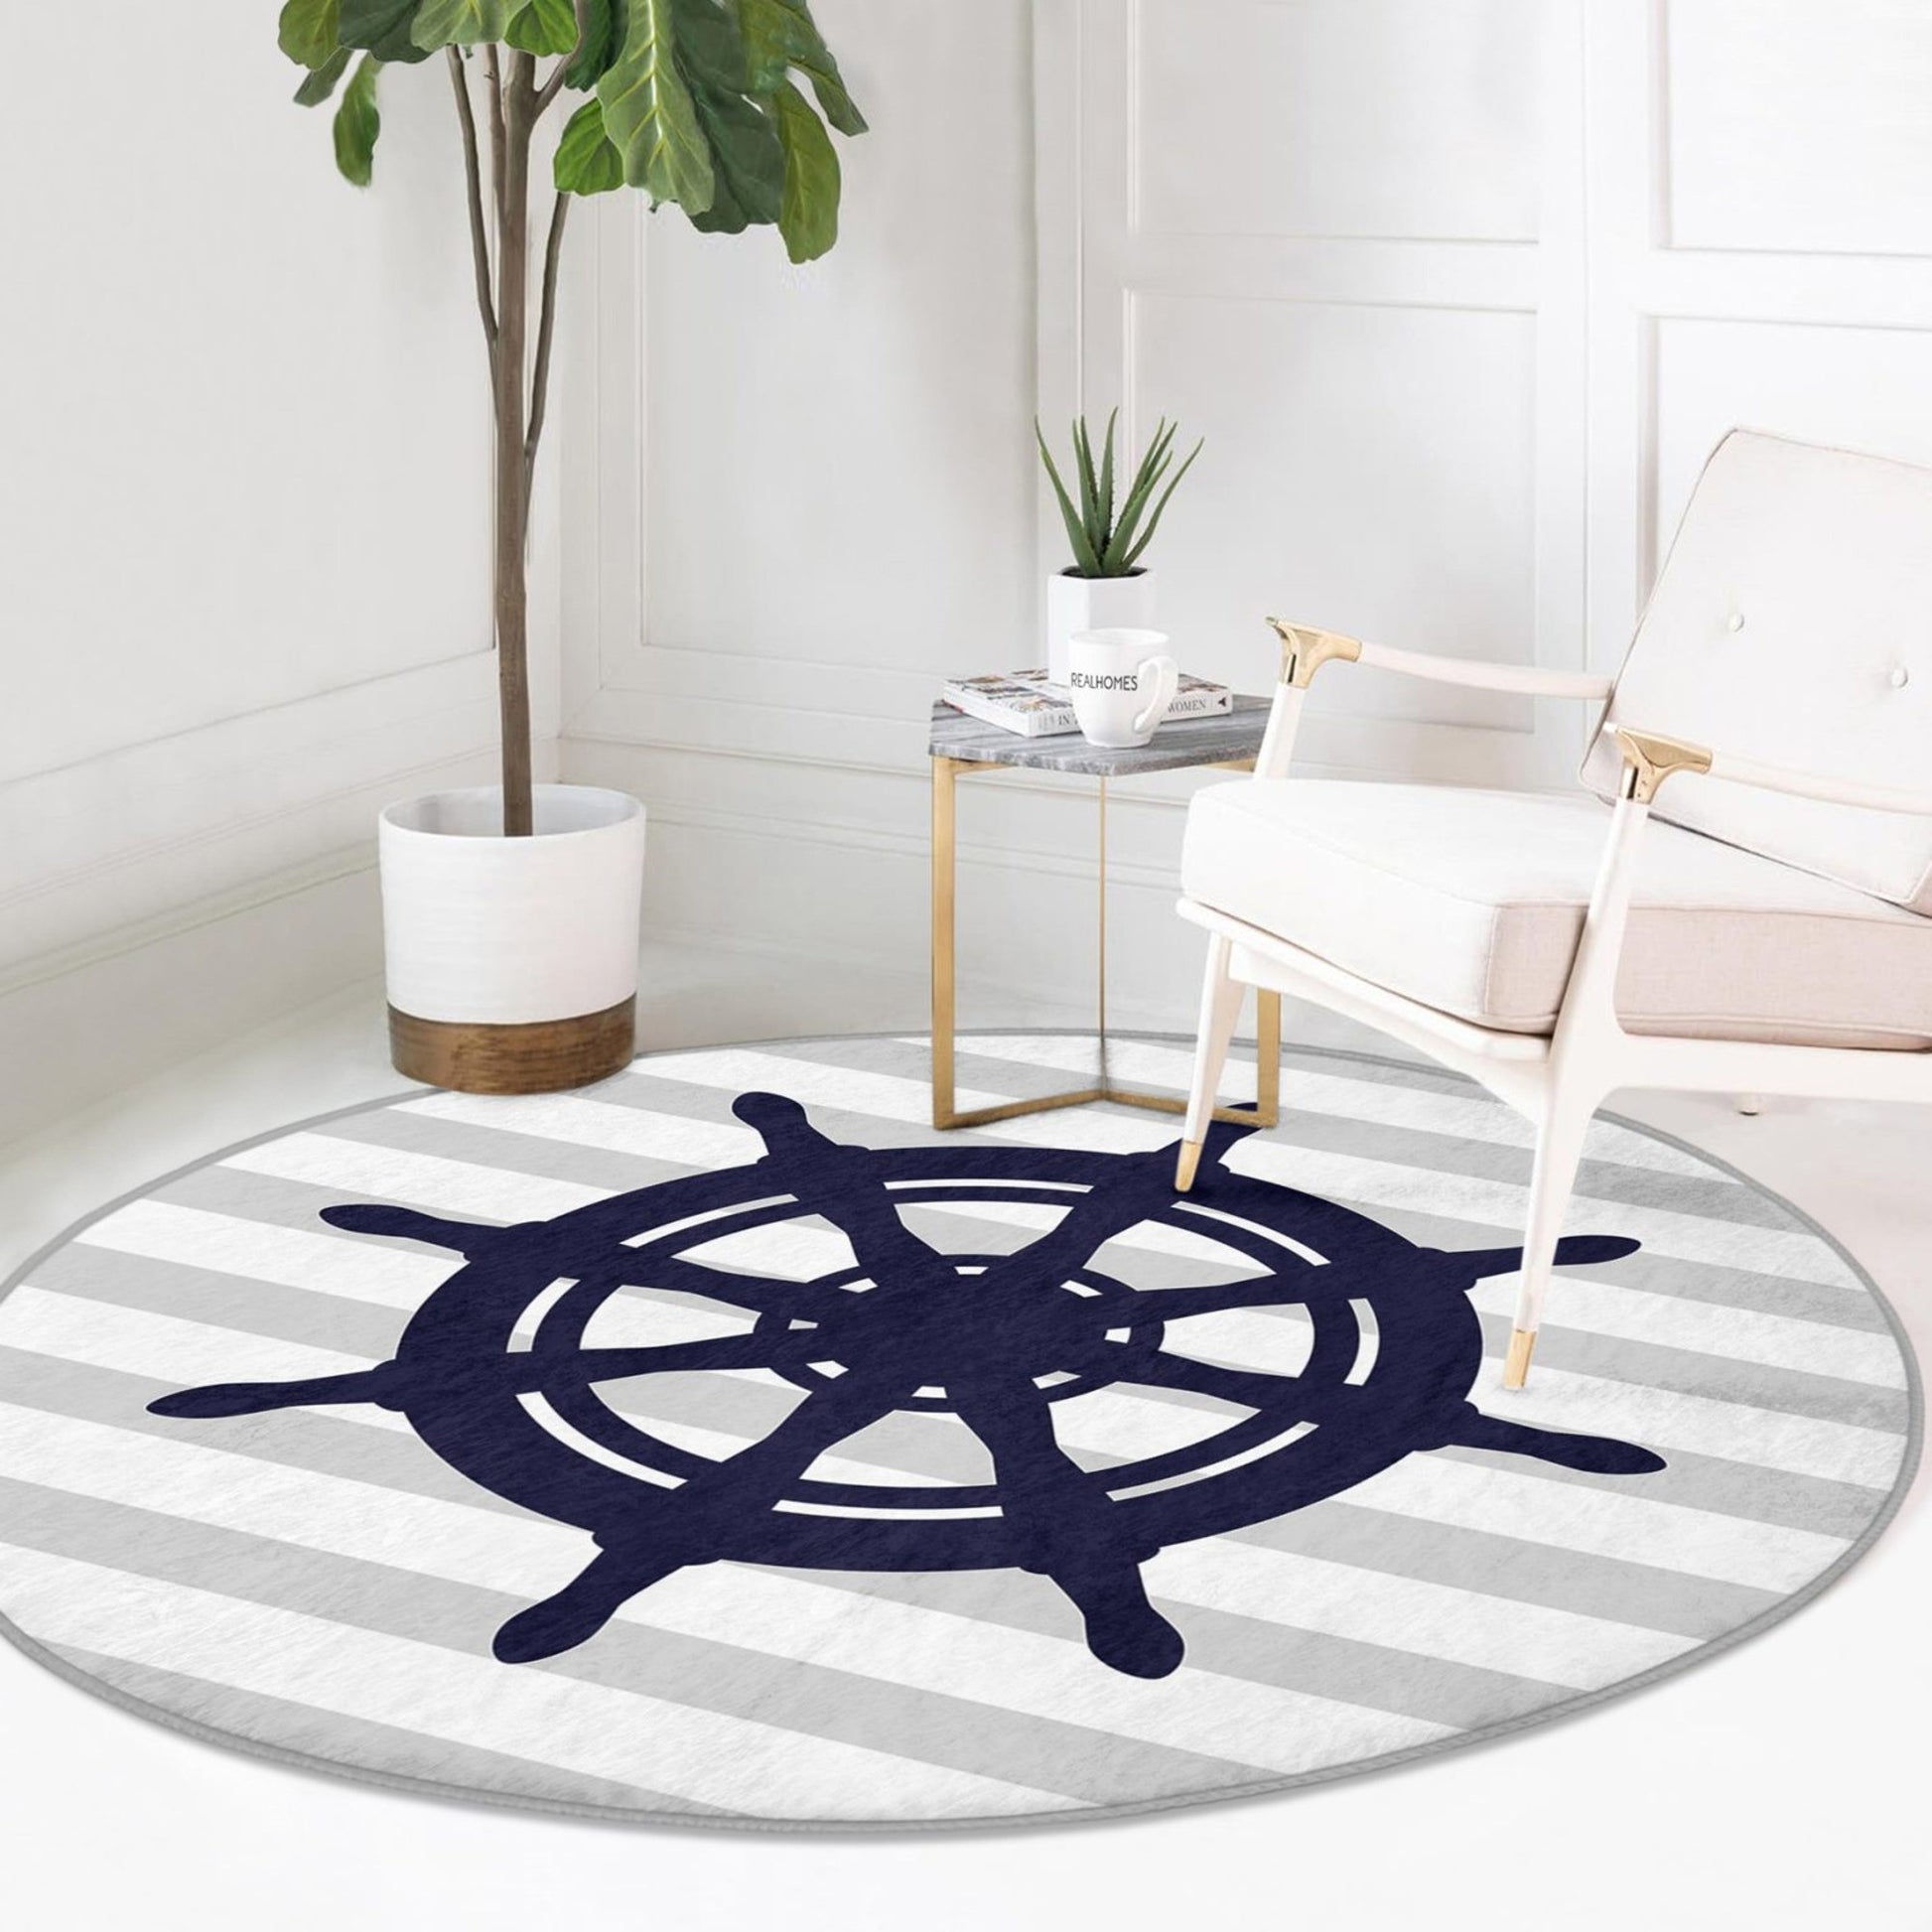 Washable Rug with Rudder Pattern - Easy Maintenance